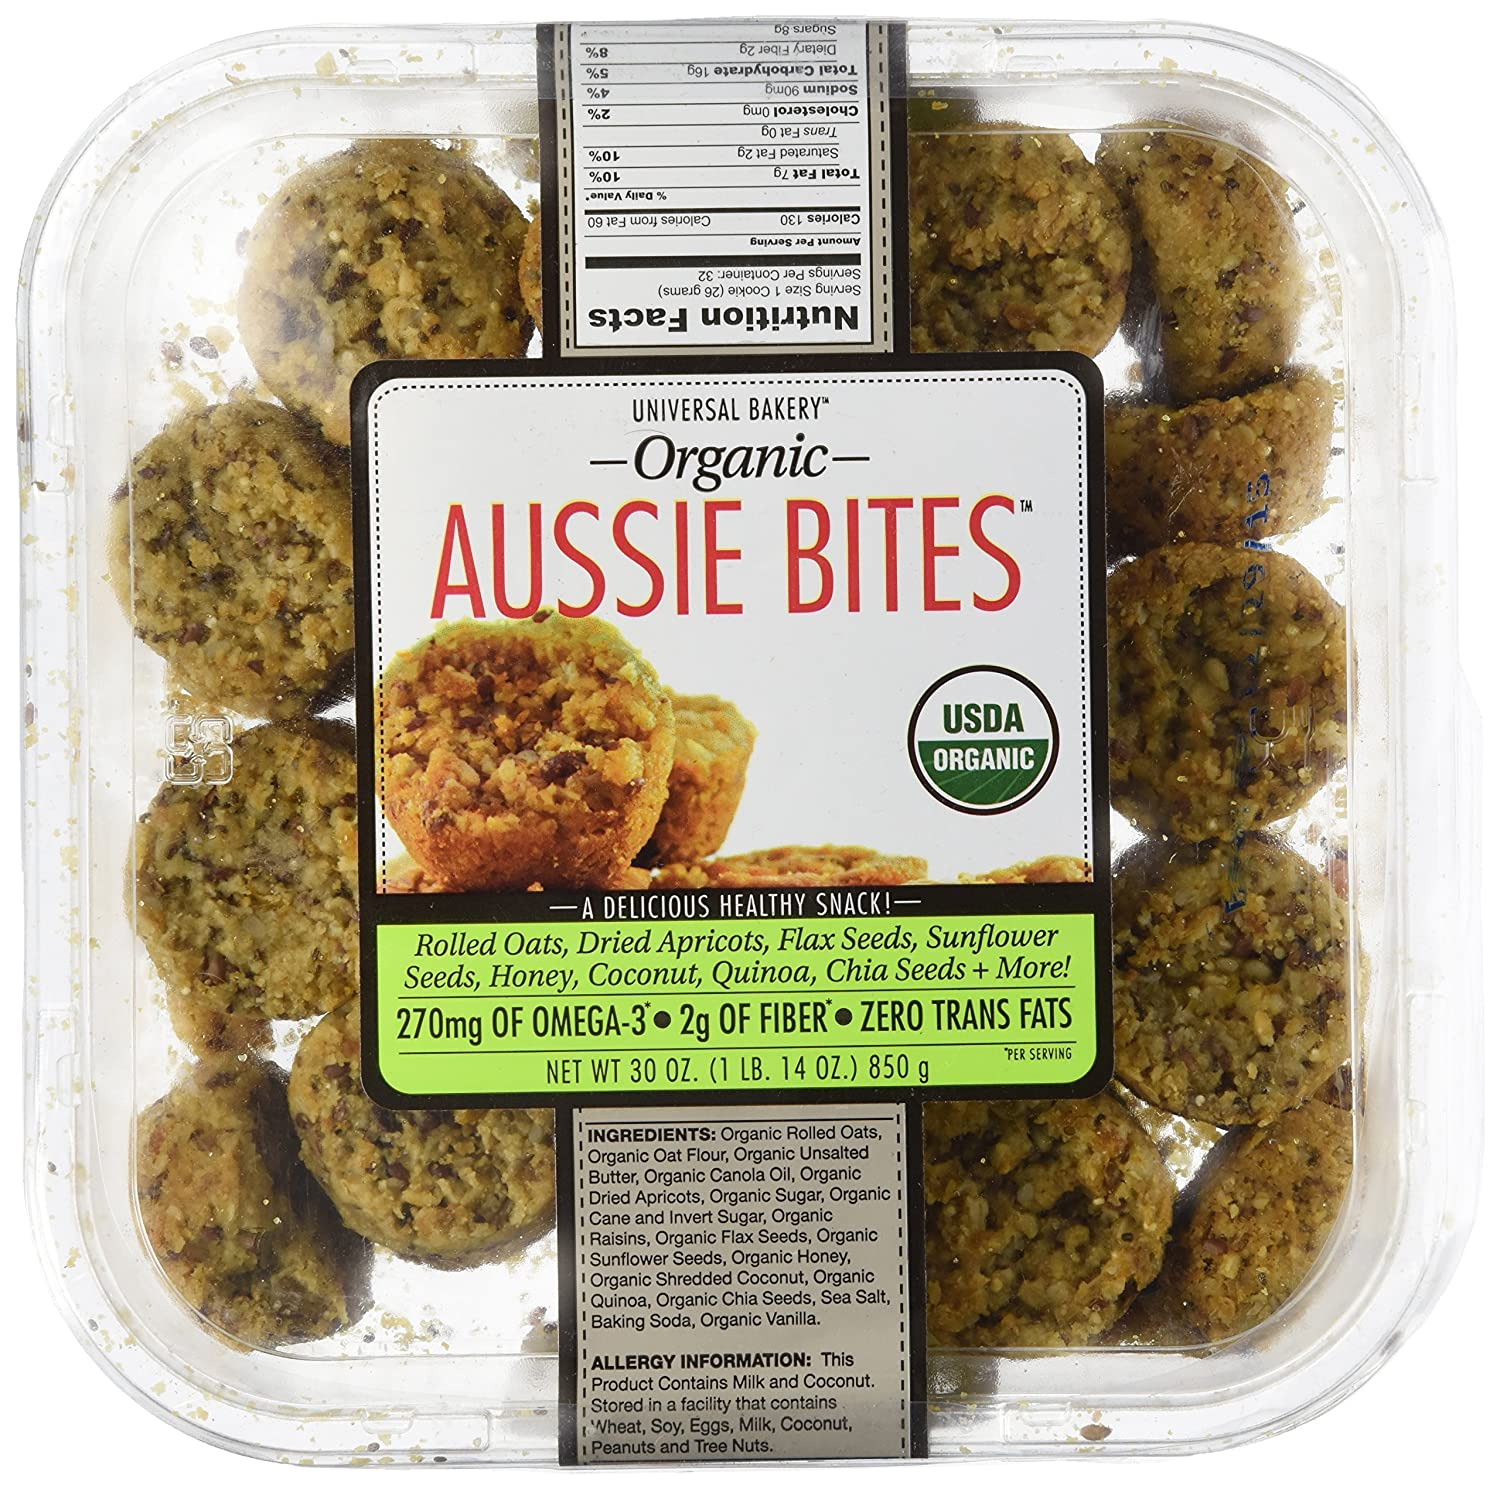 Are Aussie Bites Good for Weight Loss